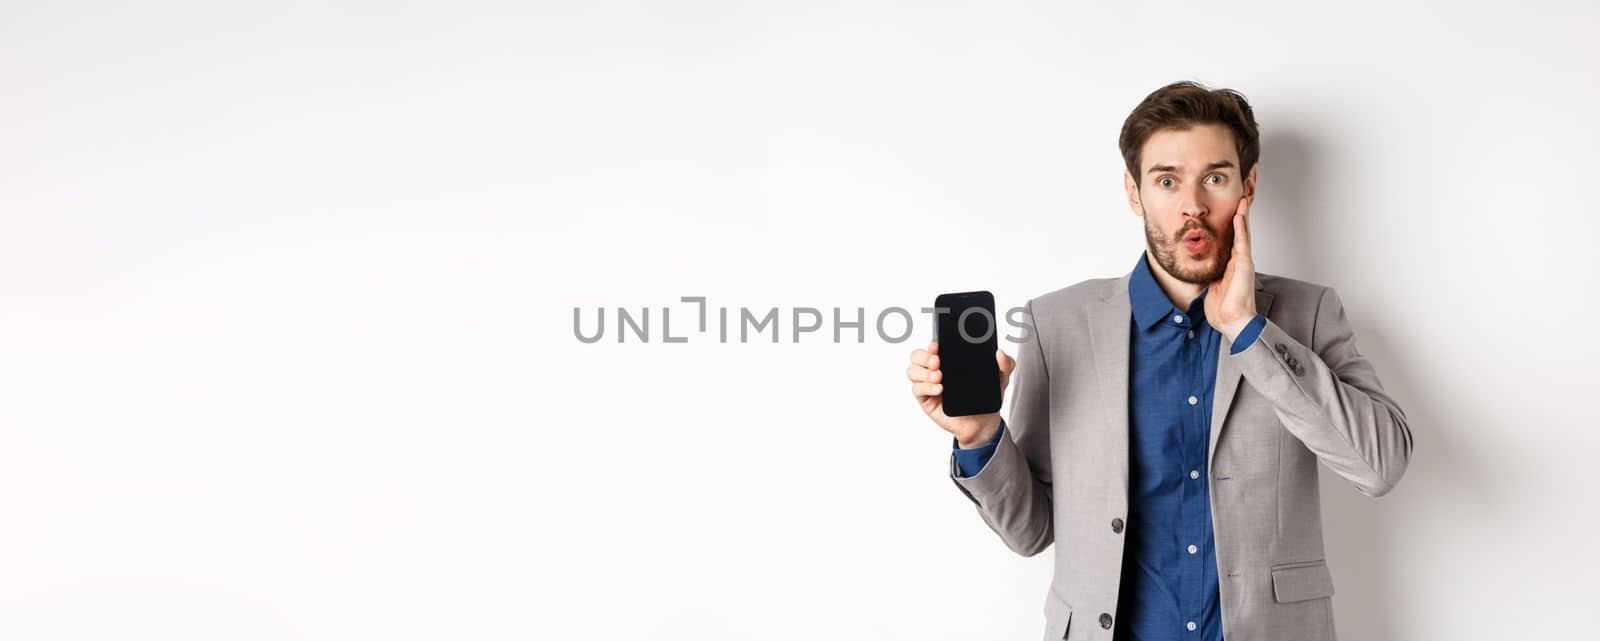 E-commerce and online shopping concept. Excited man gasping amaze and showing empty smartphone screen, wearing business suit, white background.